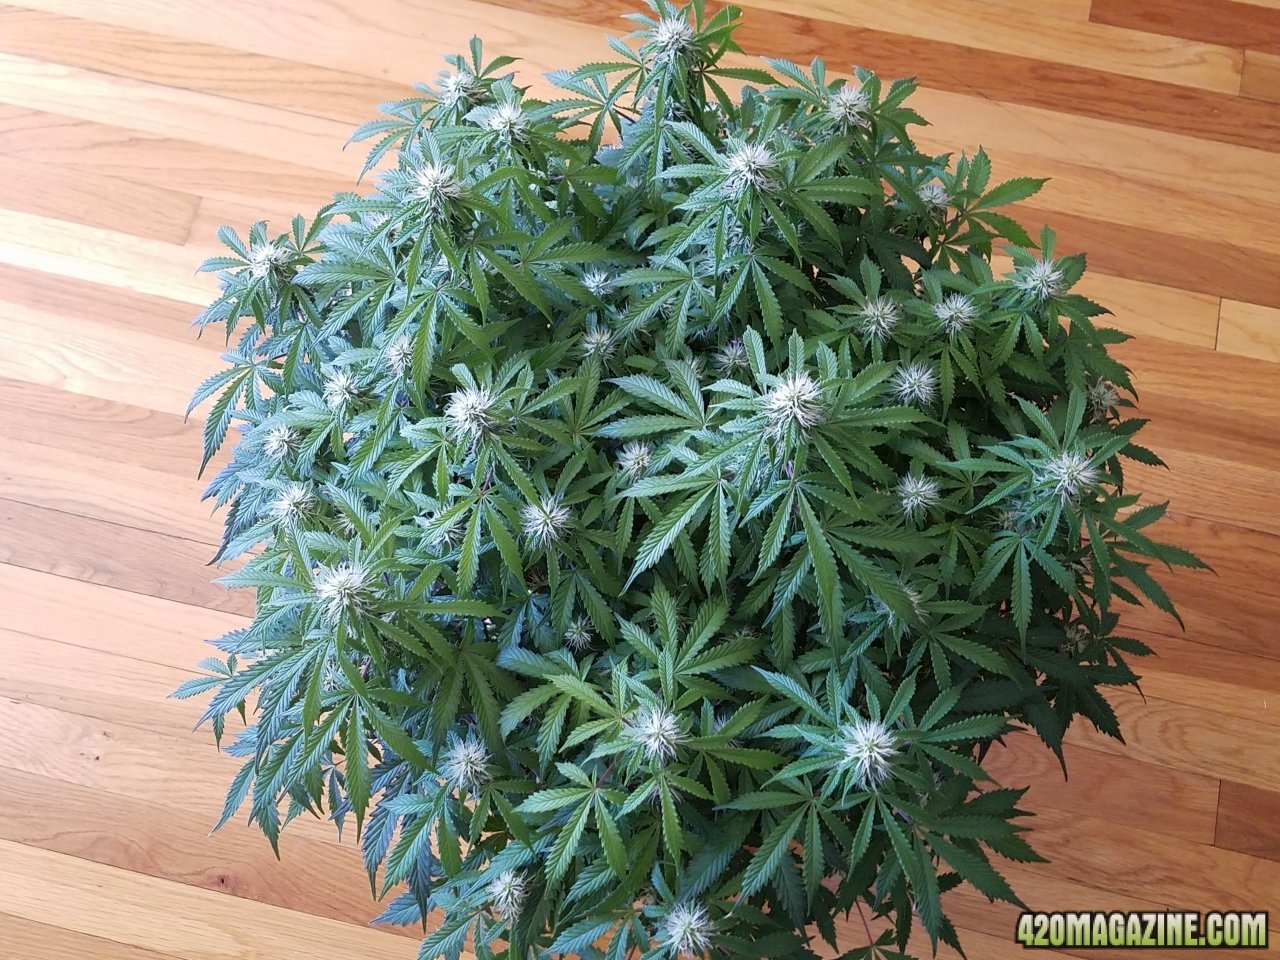 042318 Jack Herer Auto Day 67 Day 18 with Hairs 3.jpg